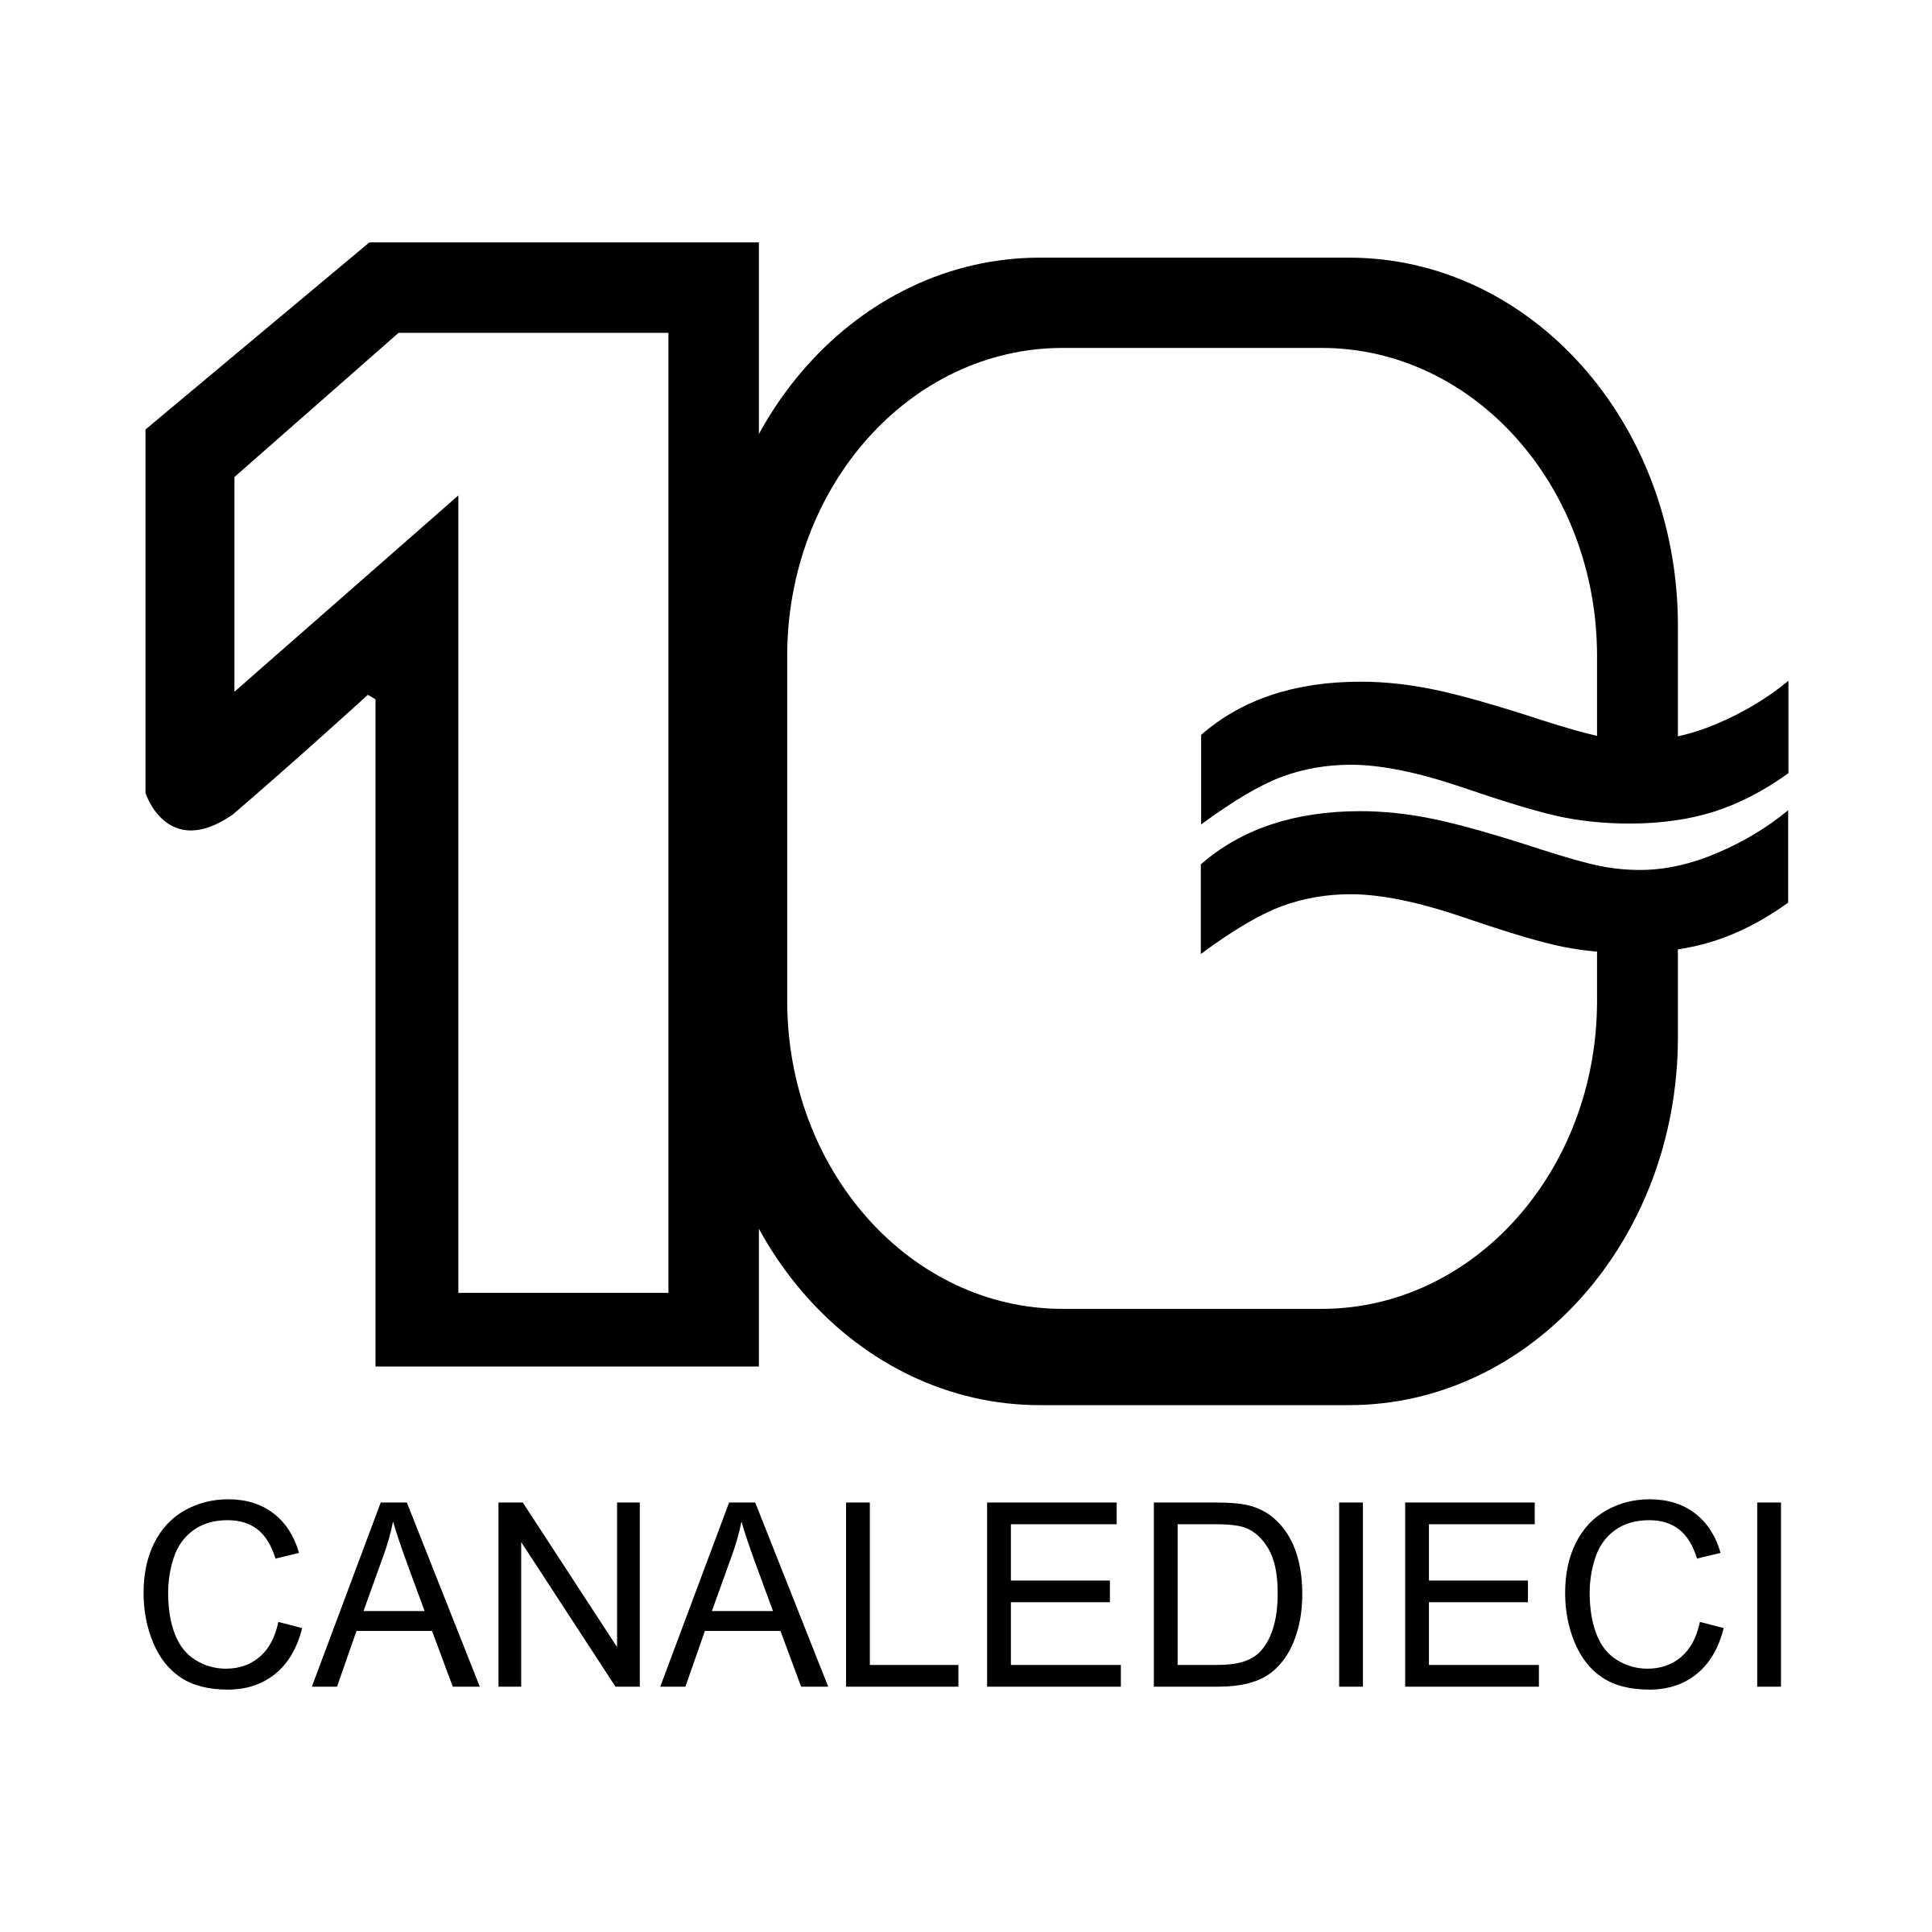 Canali Logo - Canale Dieci Logo PNG Transparent & SVG Vector - Freebie Supply